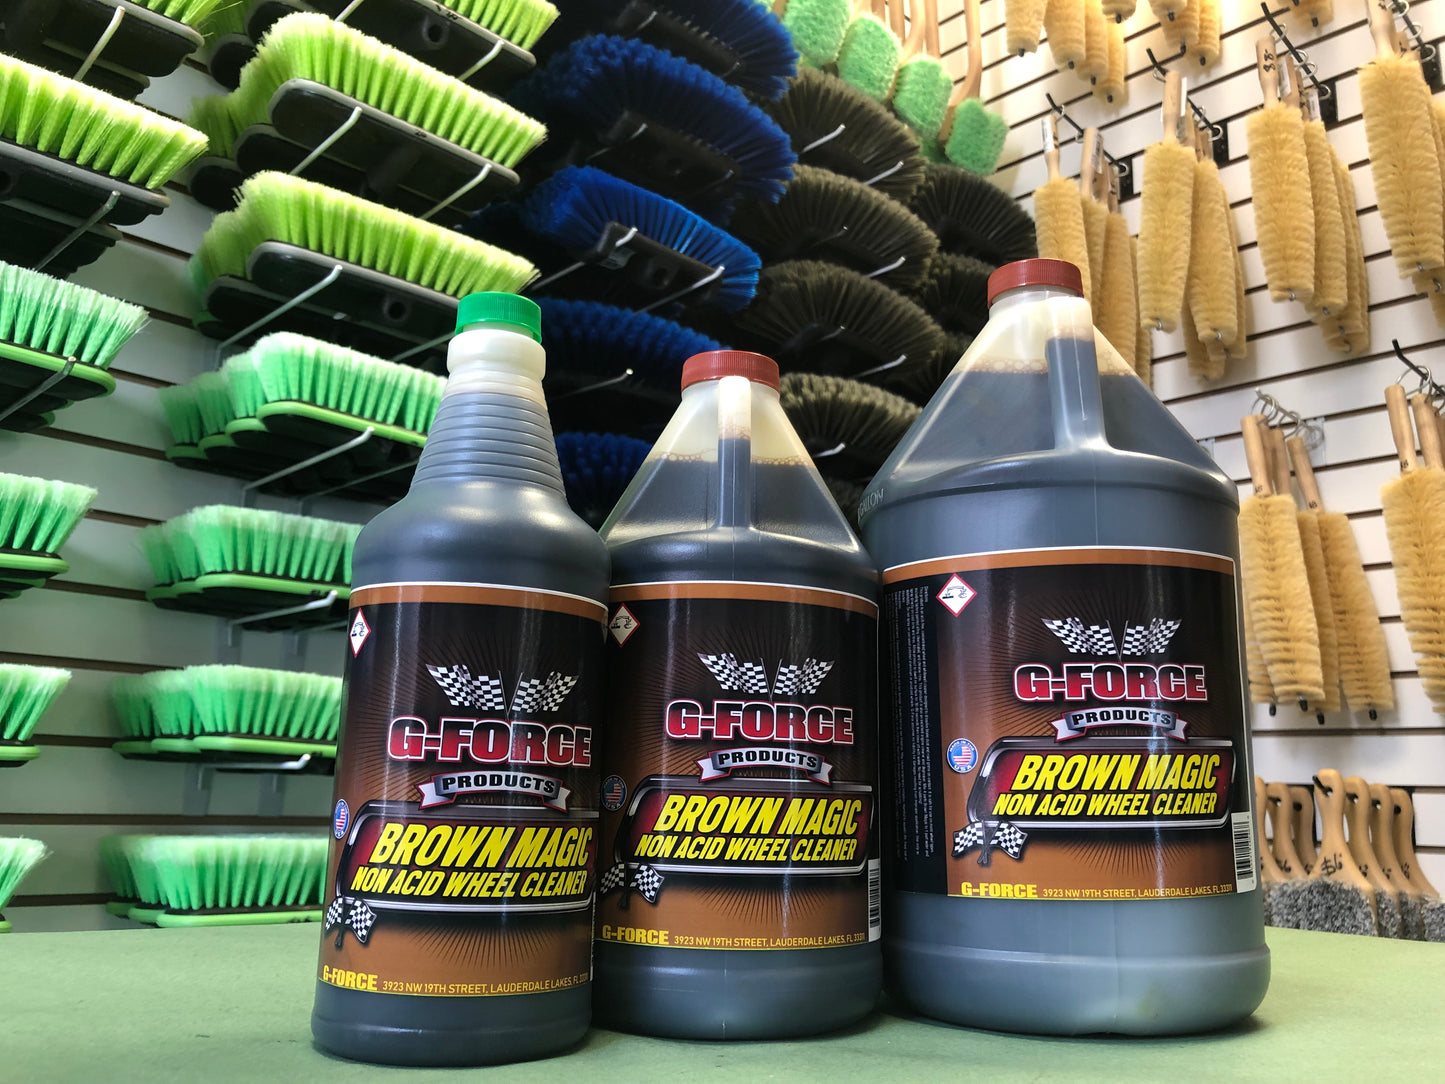 BROWN MAGIC CONCENTRATED (non acid wheel cleaner)